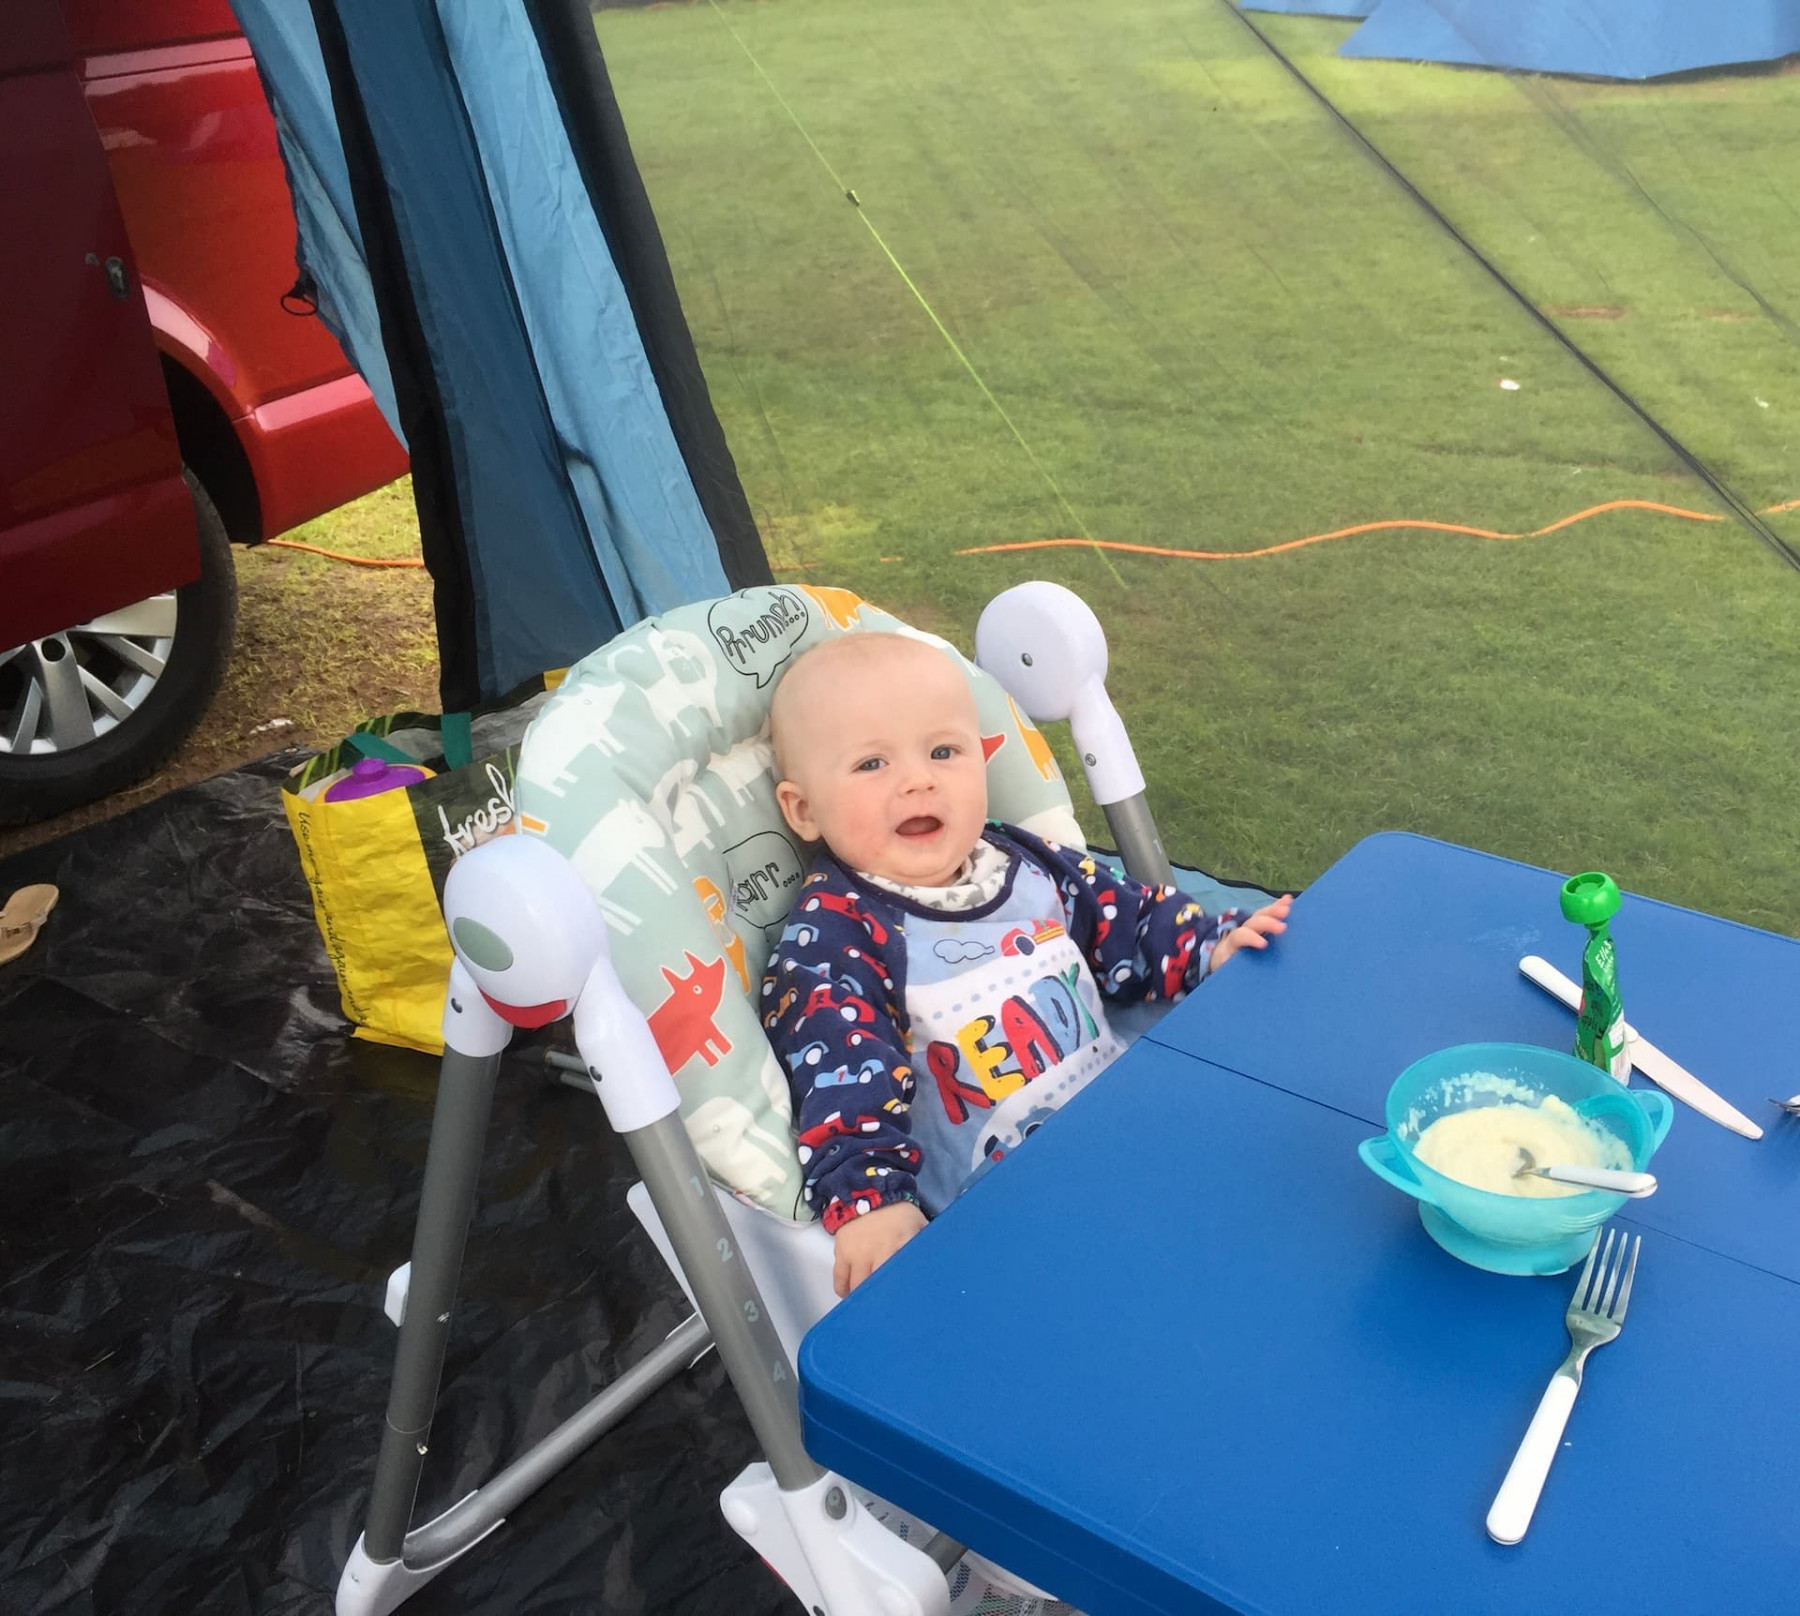 Dougie was ready for his breakfast in our drive-away awning back in 2017!